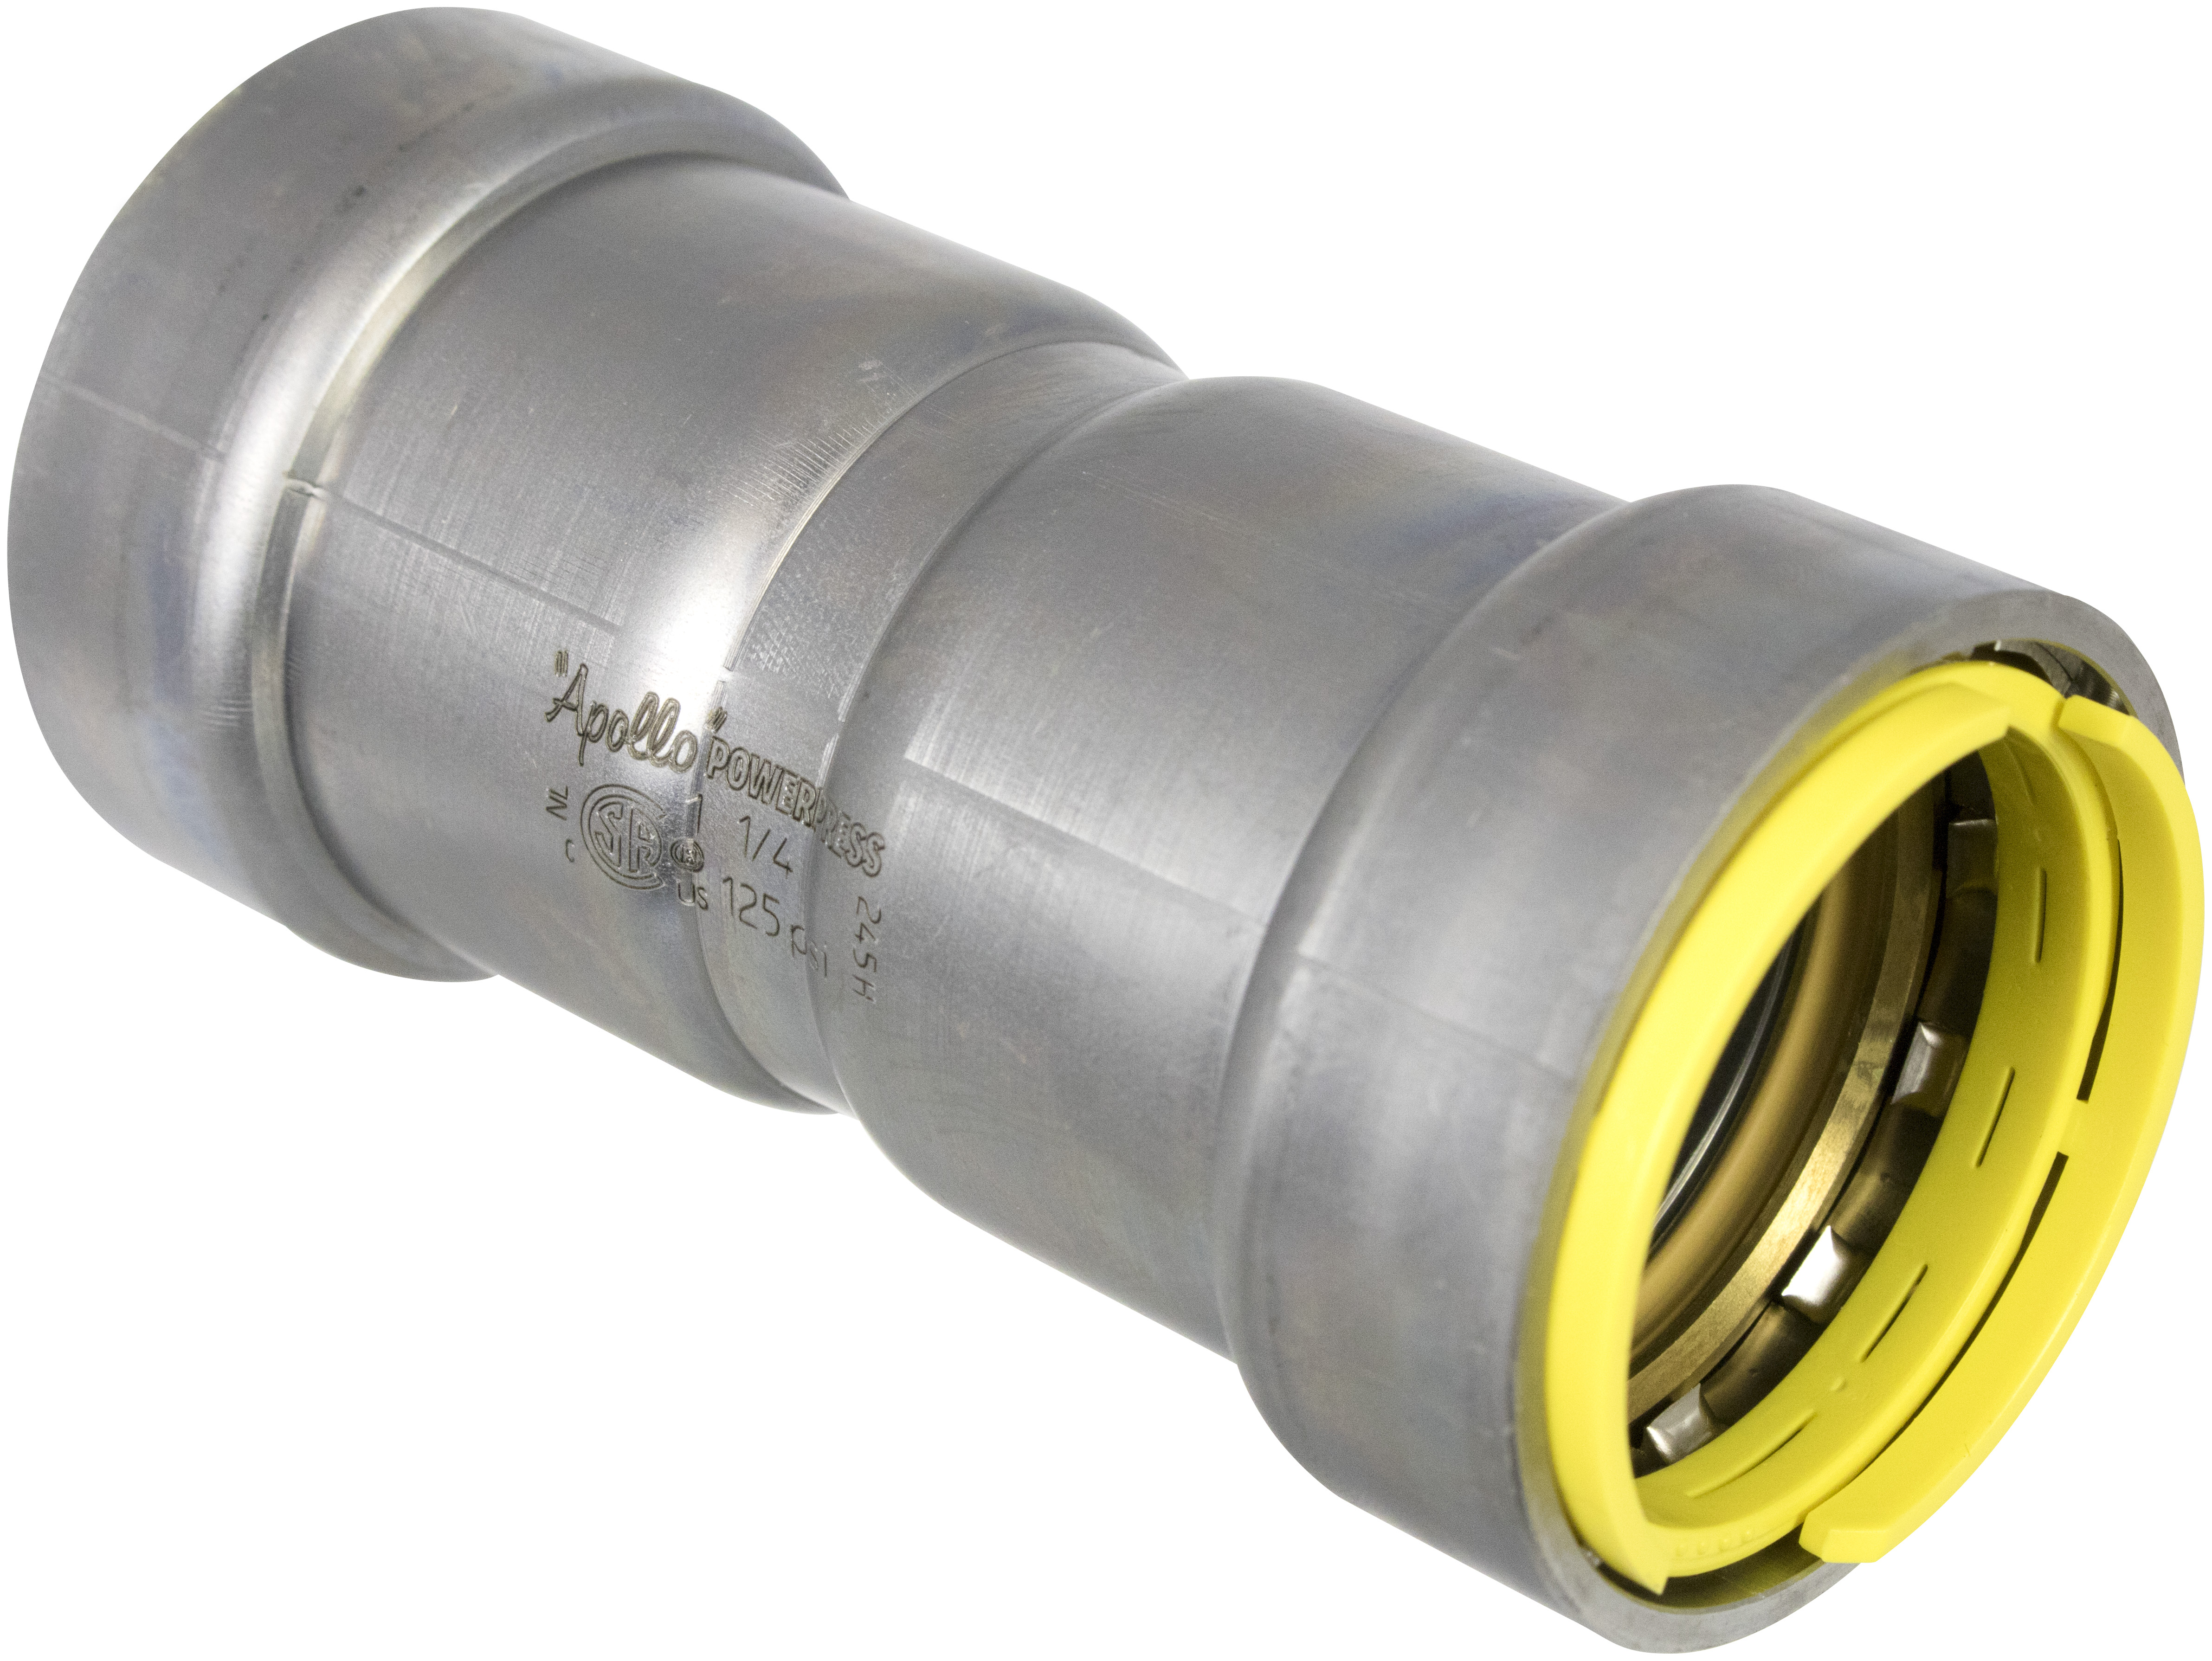 1 APOLLO POWERPRESS GAS COUPLING - WITH STOP -  P X P -  1 -  CARBON STEEL (ZNNI COATED) -  HNBR SEALING ELEMENT -  VISUAL CONTROL RING TECHNOLOGY (YELLOW) -  MODEL NO. 400G